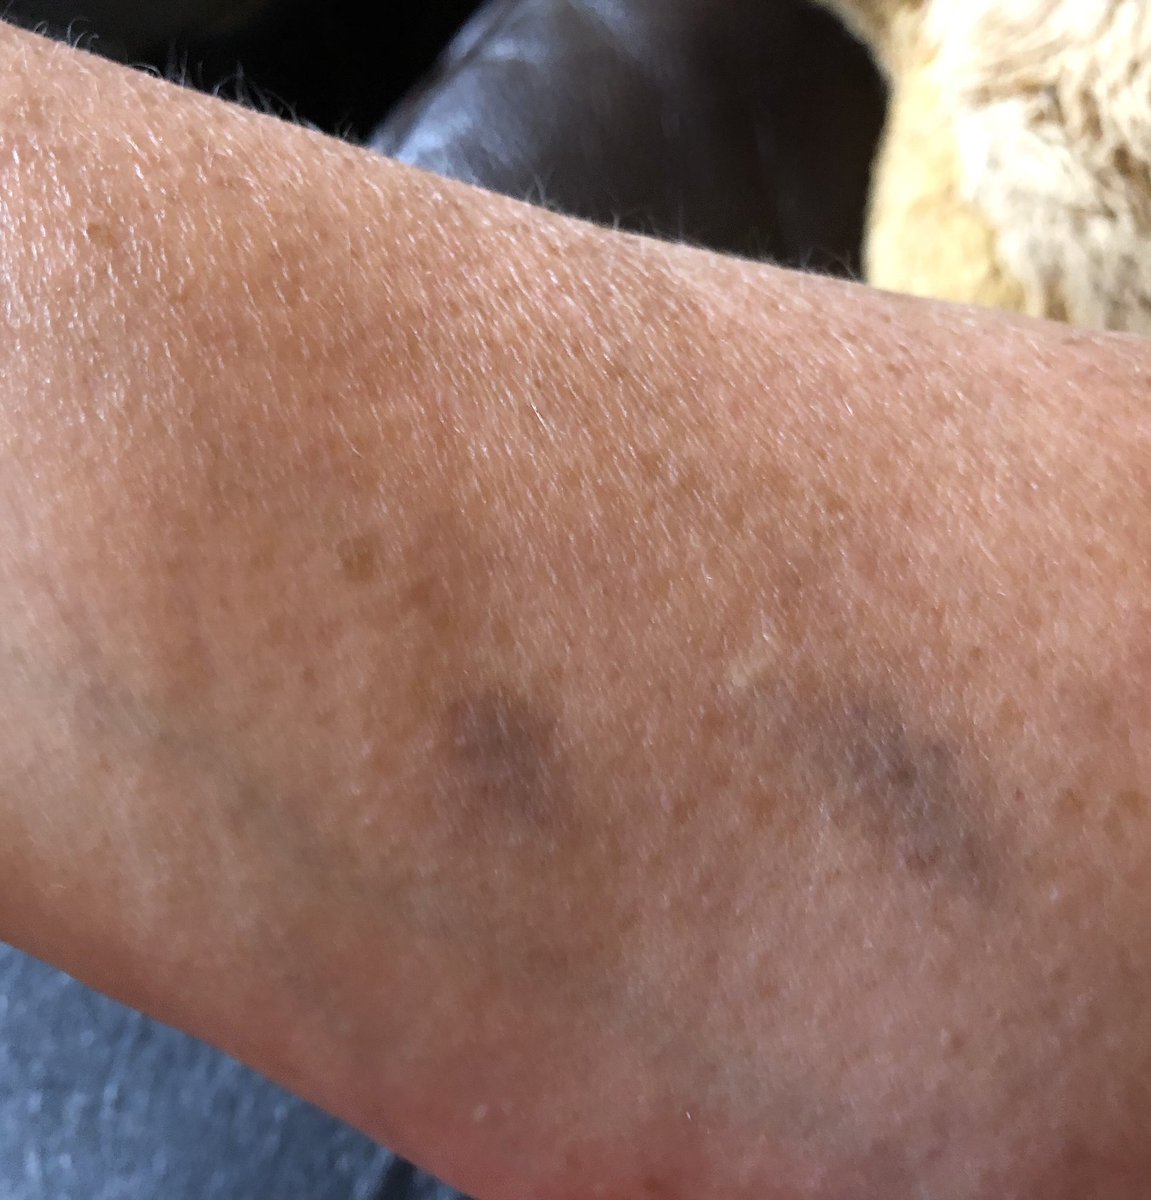 This is what happens when you play tug of war with a retired police dog and she accidentally gets your arm 🤣  #RPDKeach @polscotdogs #ShesStillGotIt 🤣🐾💙🐾